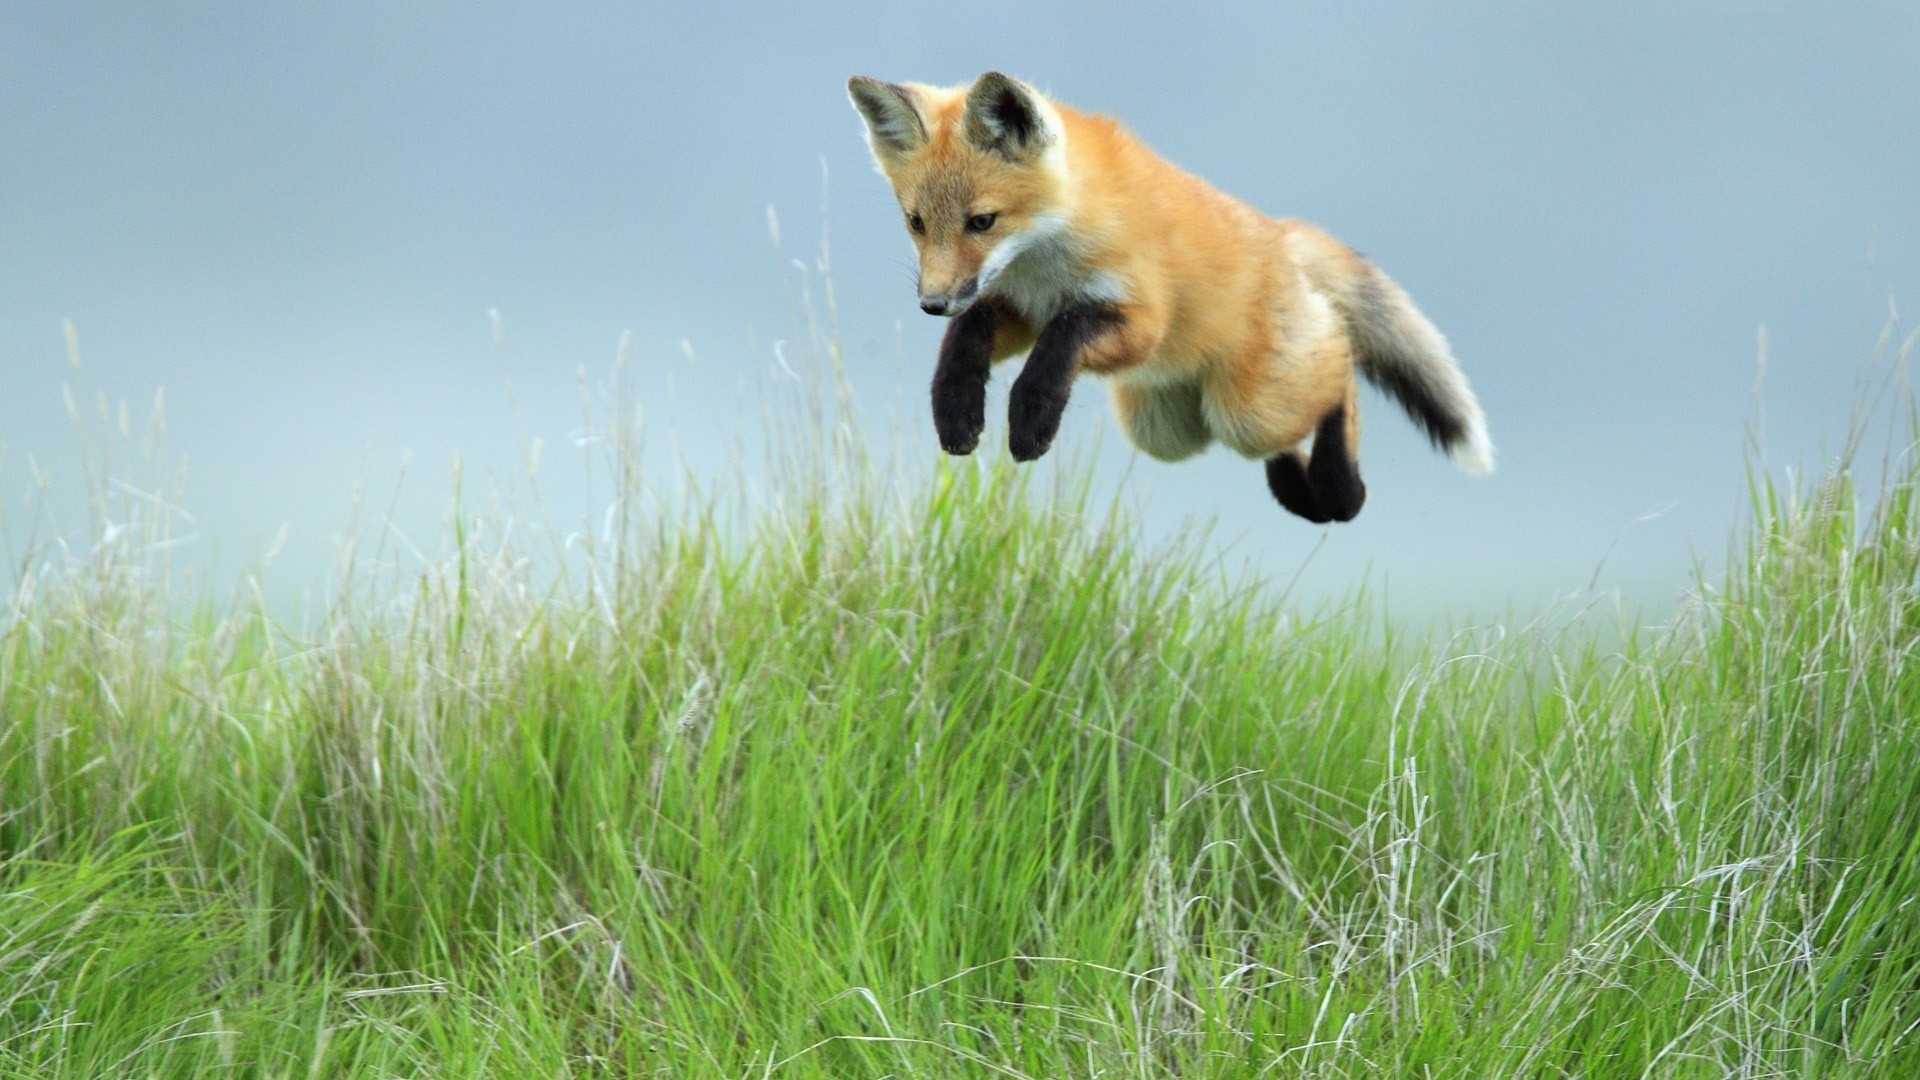 Fox Hunts Mice Wallpaper And Image Pictures Photos